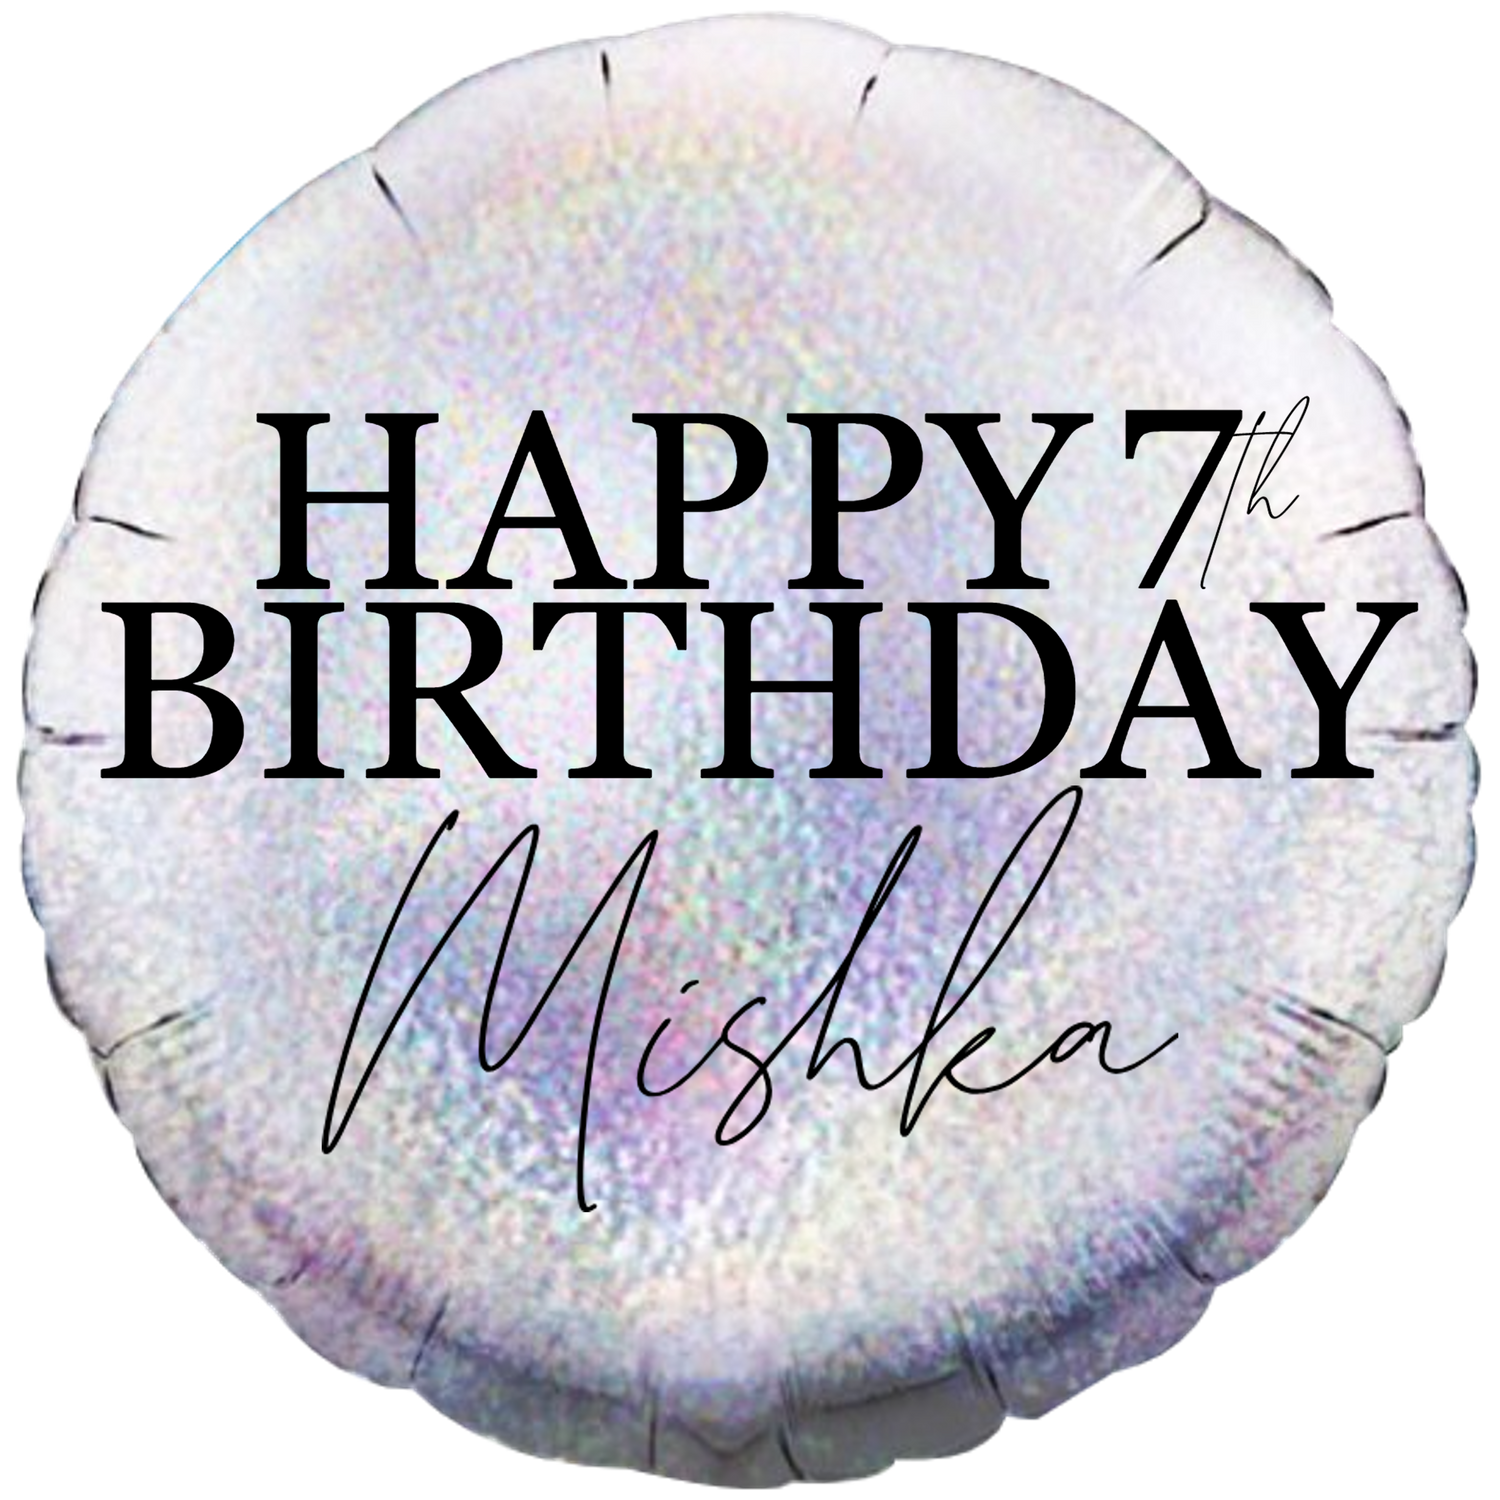 Personalized/Customized Custom Name/Text & Age Holographic Silver Round Foil/Mylar Balloons For Six Months/First/Second/Third/Sixteenth/Twenty-First/Thirty/Forty/Fifty/Sixty/Seventieth Birthday, Milestone Birthday or a Special Themed Birthday Event. Supports Helium/Air, Luxury Bespoke Balloons Are a Perfect Surprise For Your Baby, Wife, Mom, Dad, Brother, Sister, Friends & Loved Ones